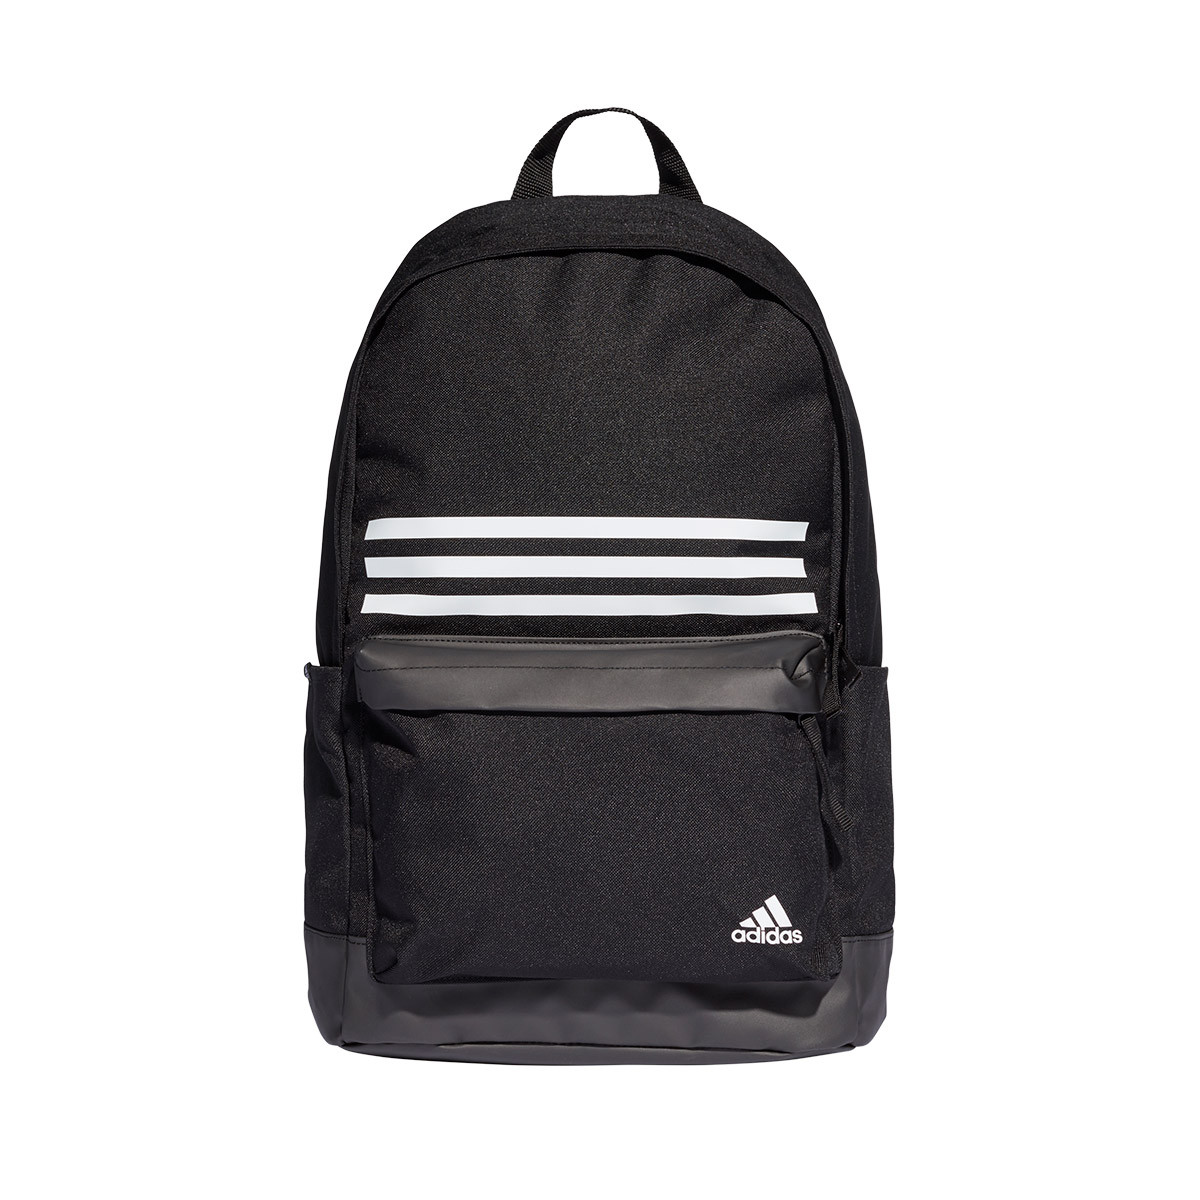 adidas classic 3s backpack white